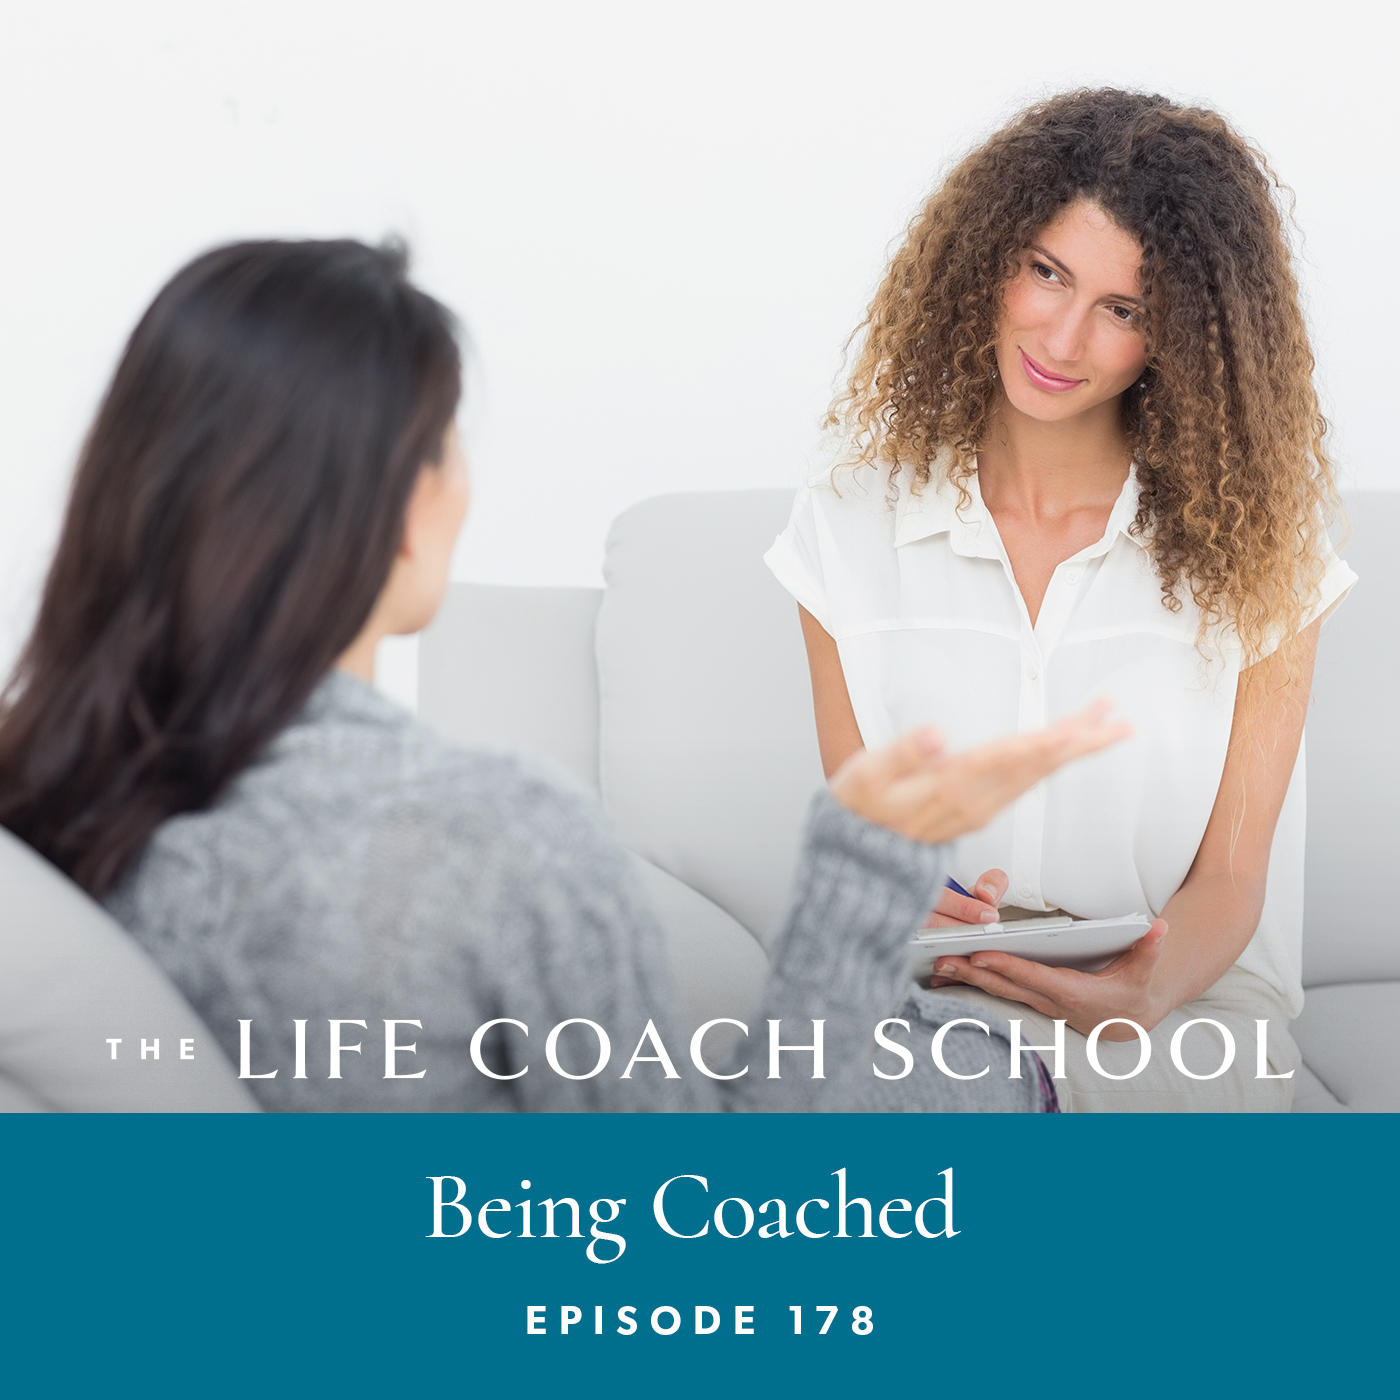 The Life Coach School Podcast with Brooke Castillo | Episode 178 | Being Coached